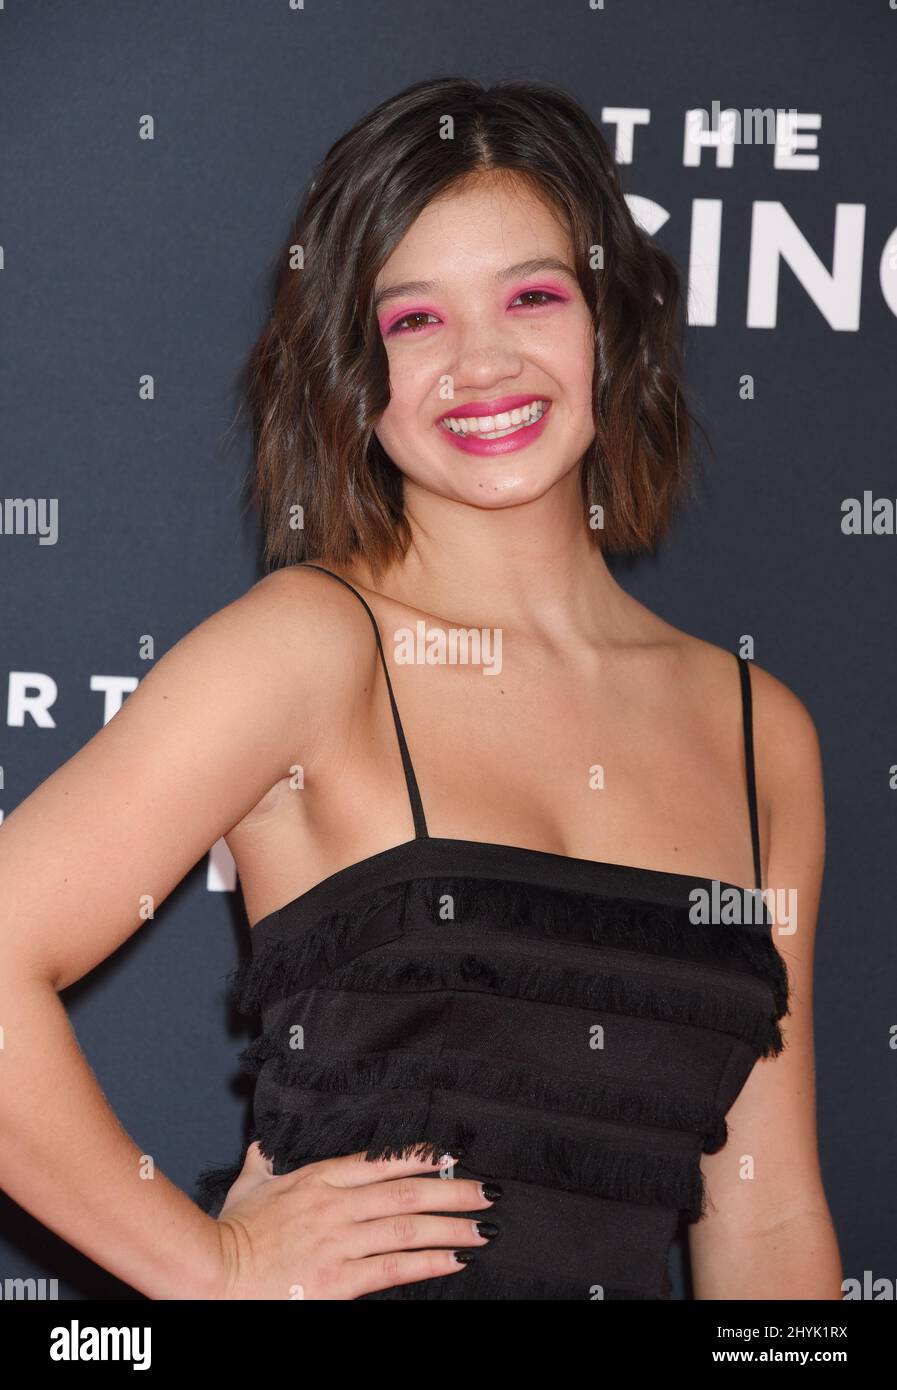 Peyton Elizabeth Lee at 'The Art of Racing In The Rain' World Premiere held at the El Capitan Theatre on August 1, 2019 in Hollywood, CA. Stock Photo